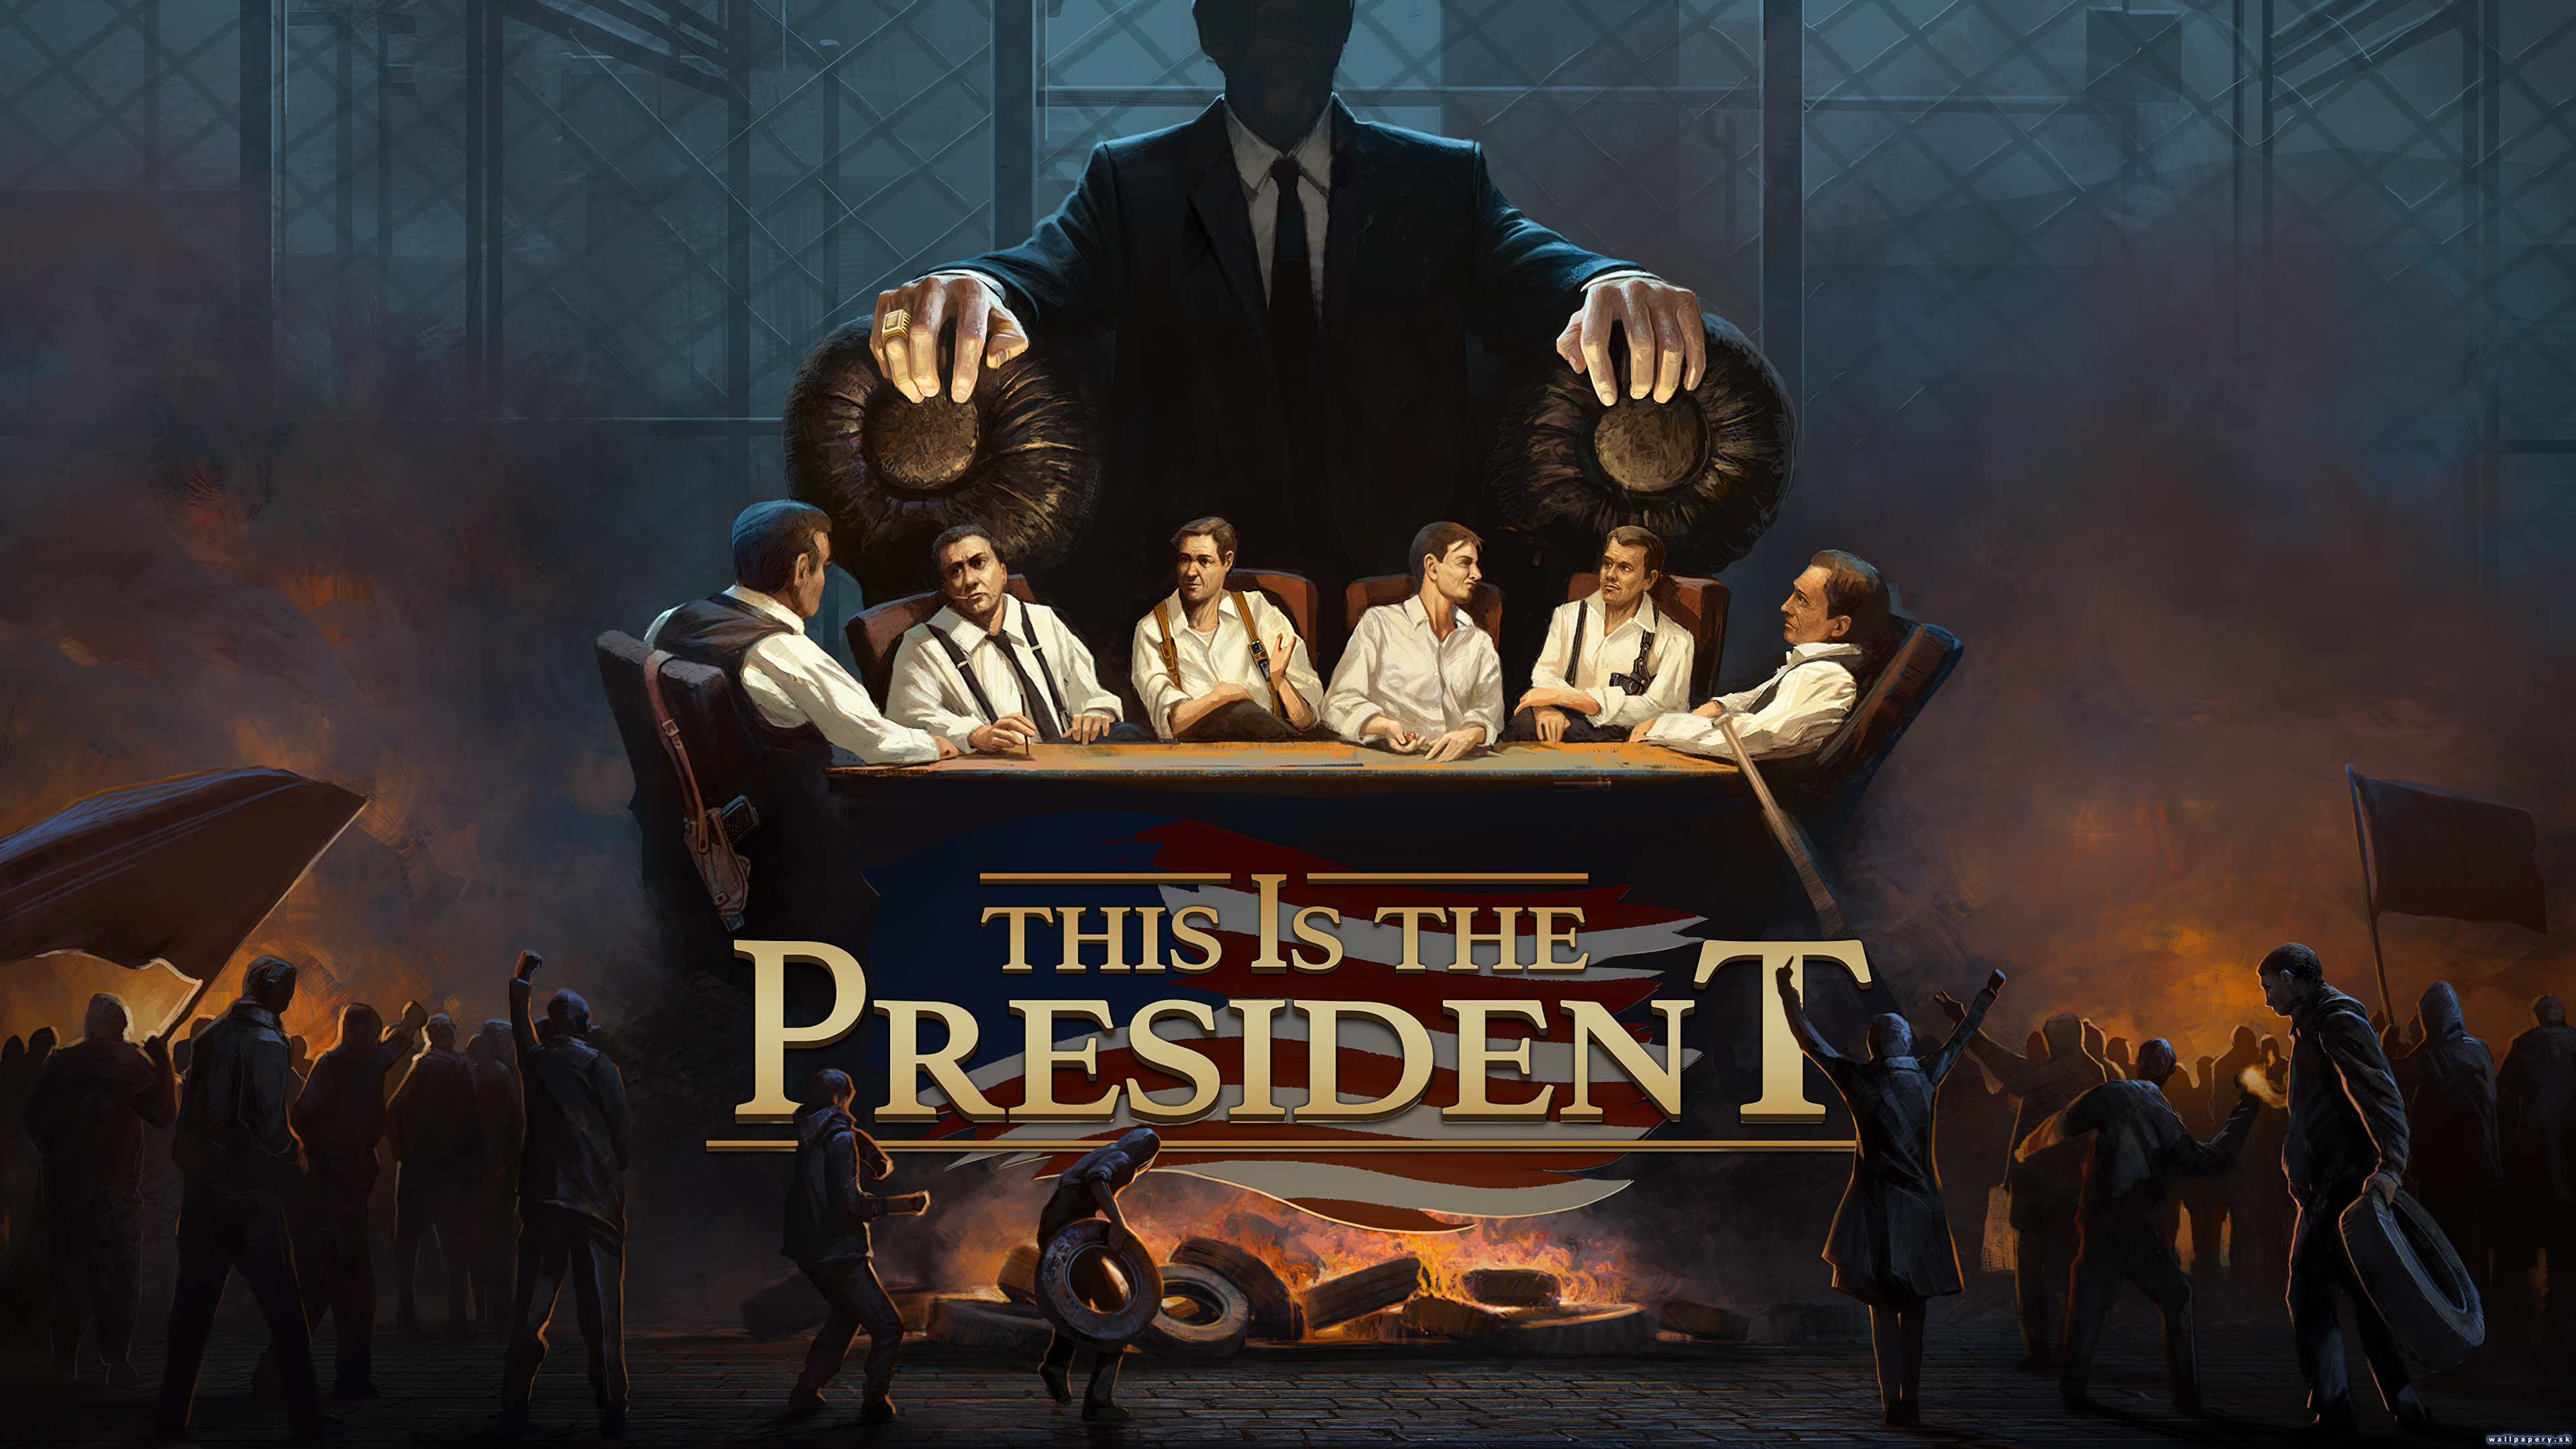 This Is the President - wallpaper 1